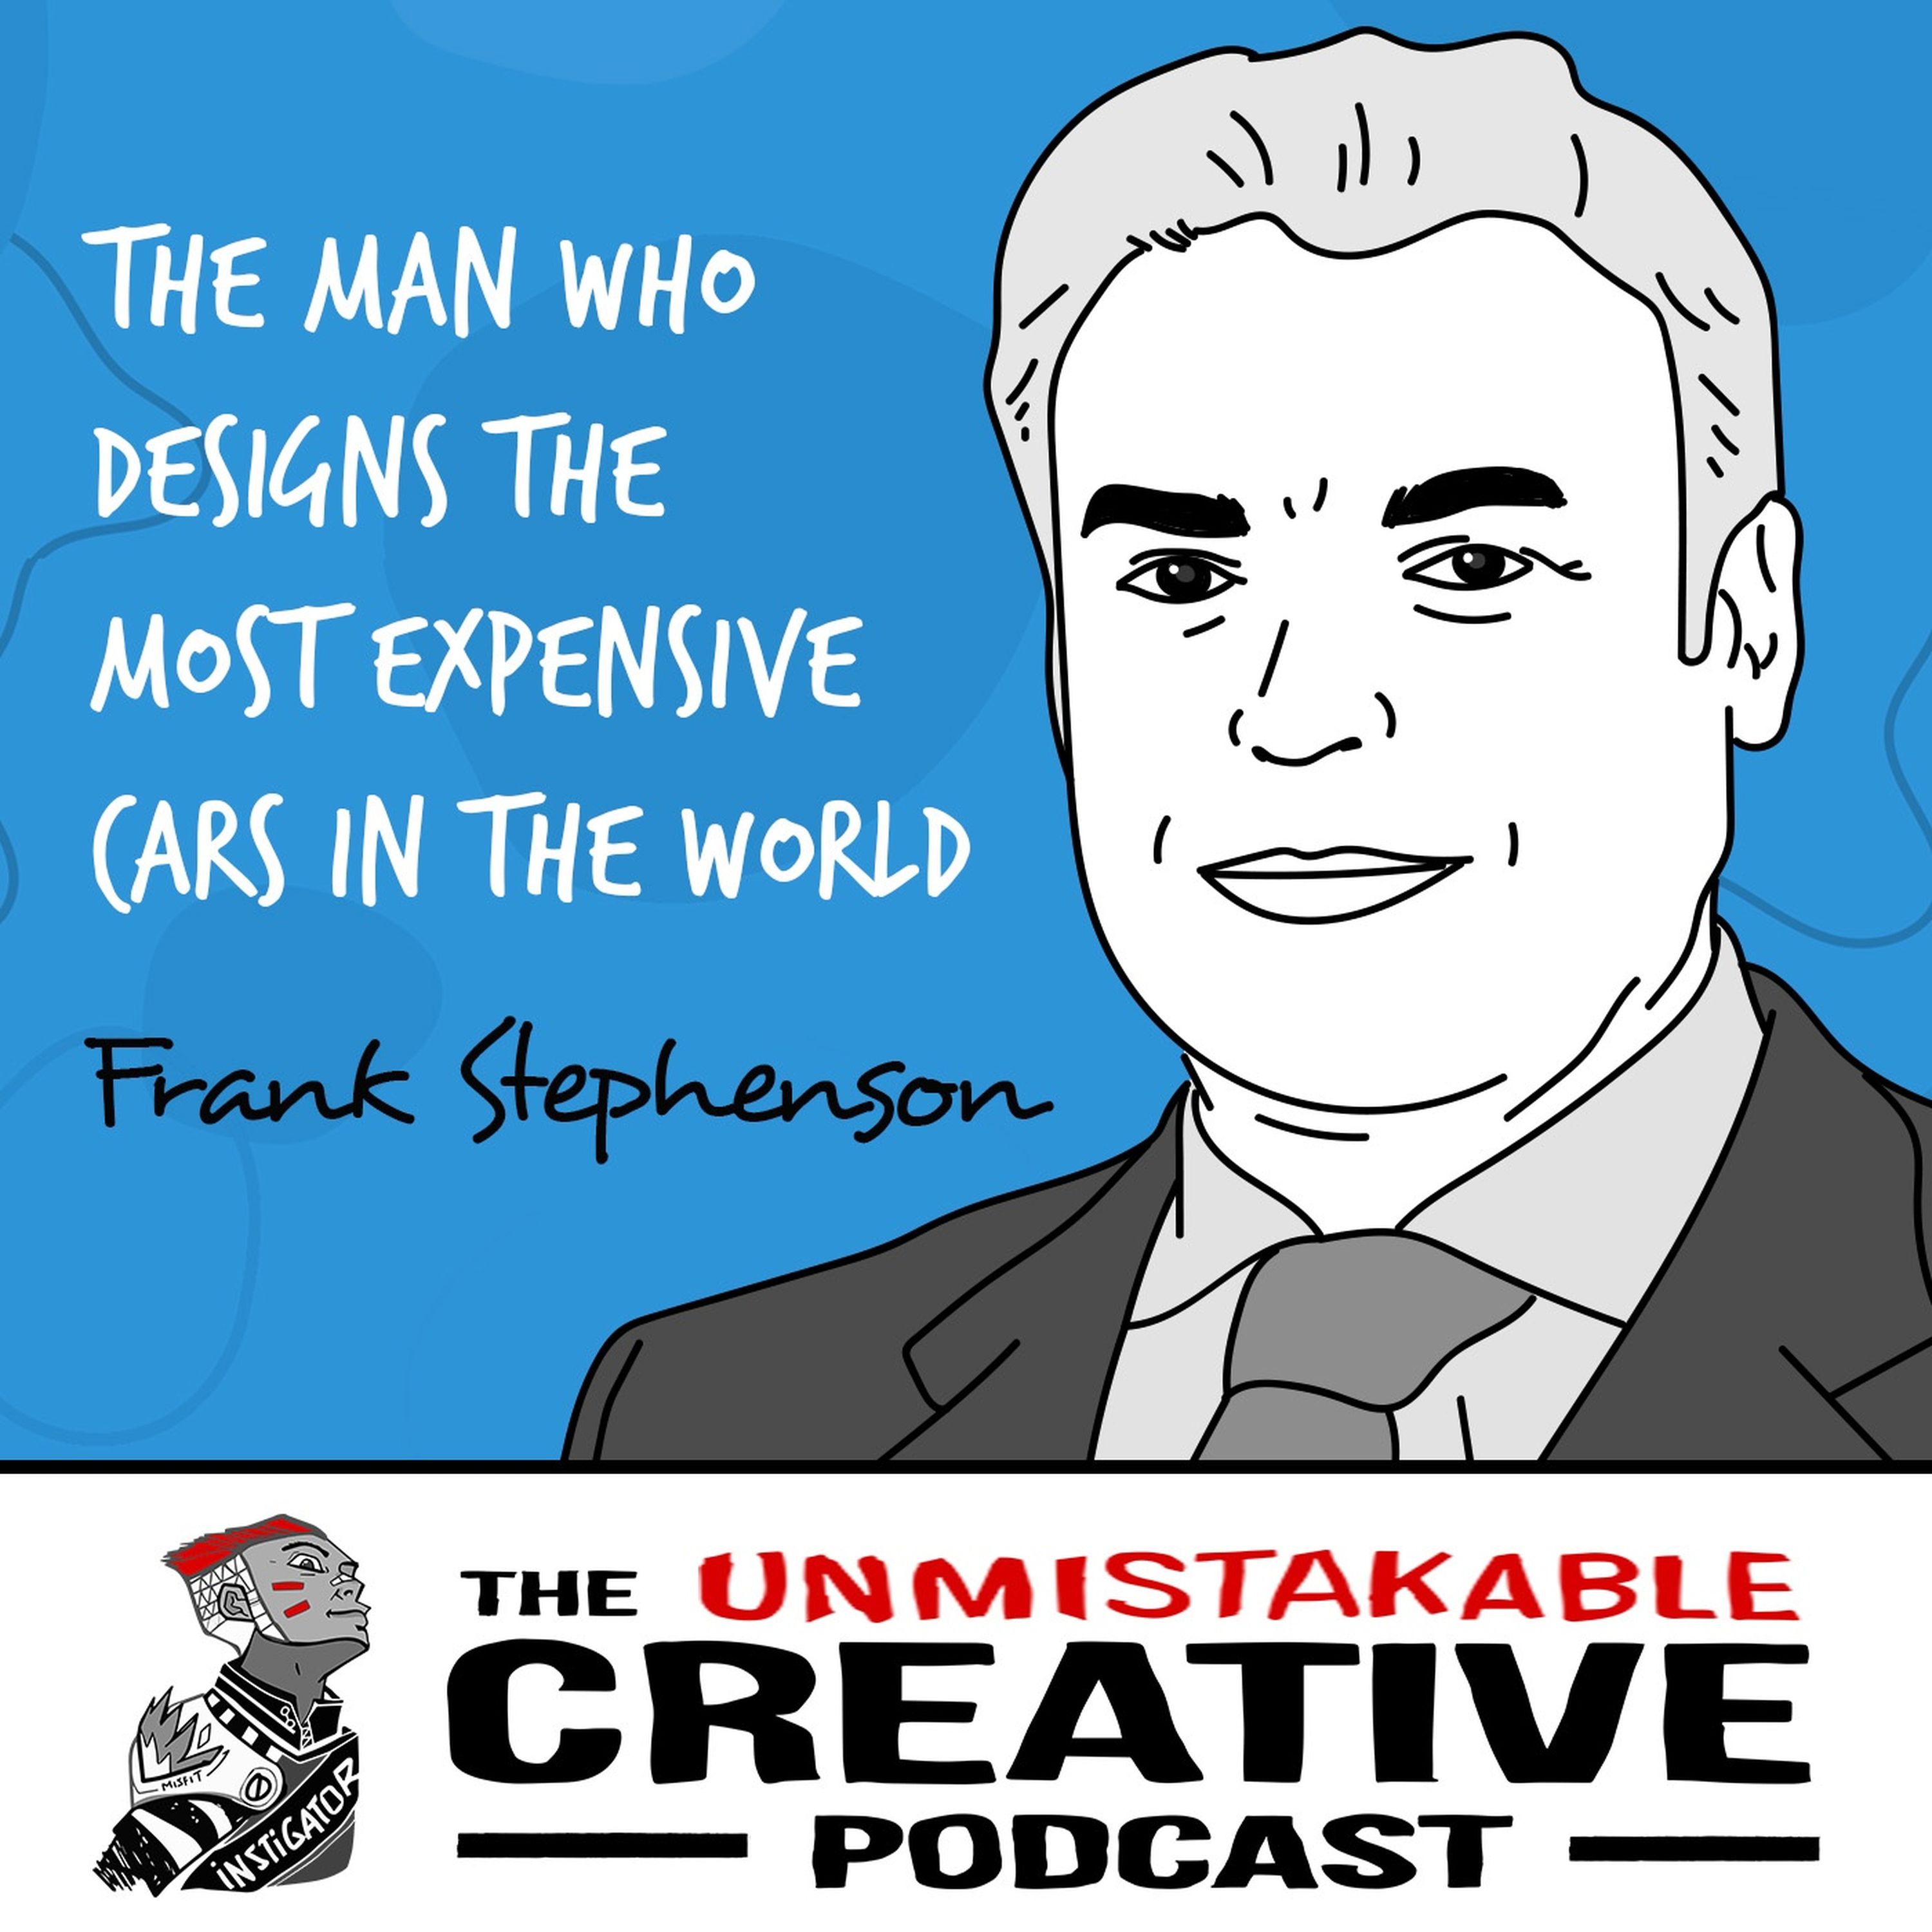 Frank Stephenson: The Man Who Designs the Most Expensive Cars in The World